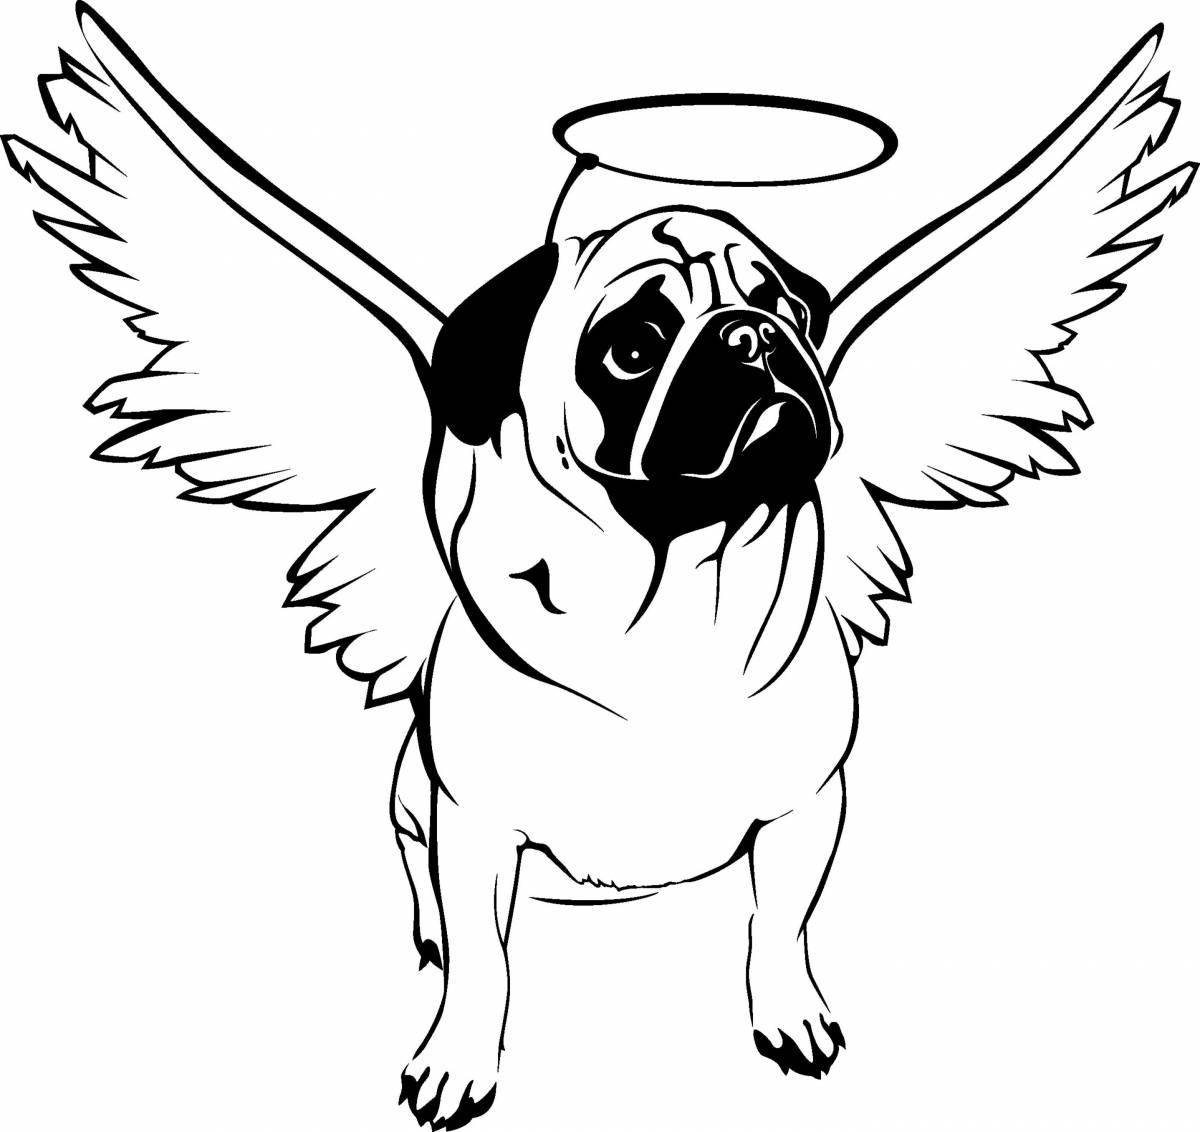 Coloring page fluttering dog with wings